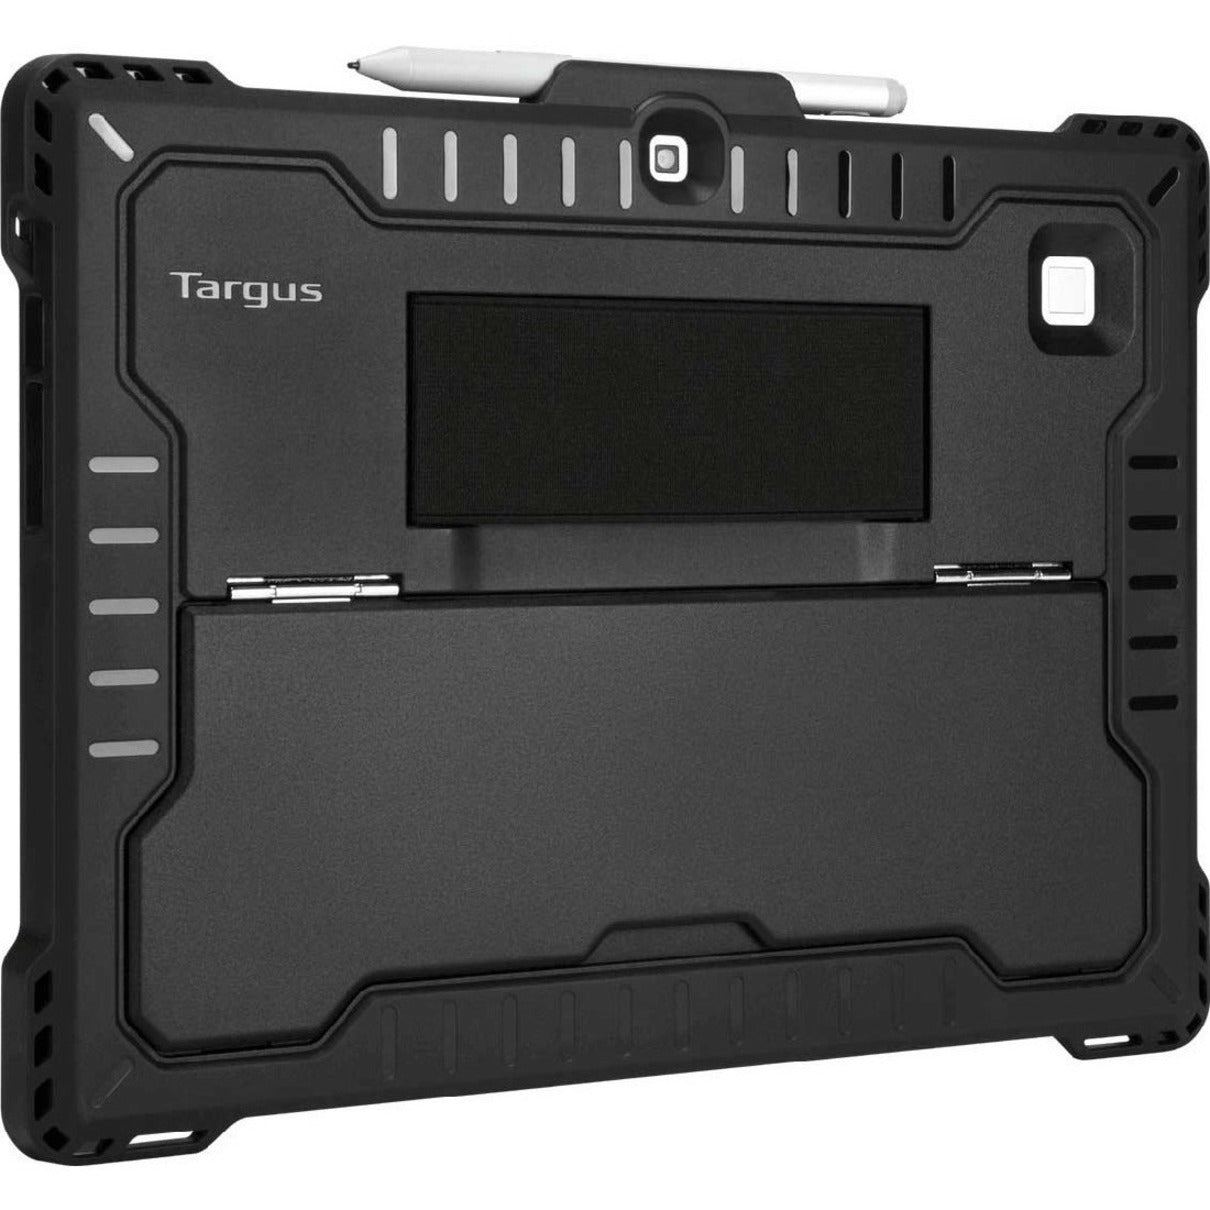 Targus THZ790GL Commercial Grade Tablet Case For HP Elite x2 1013 G3, Rugged Carrying Case for Stylus and Tablet